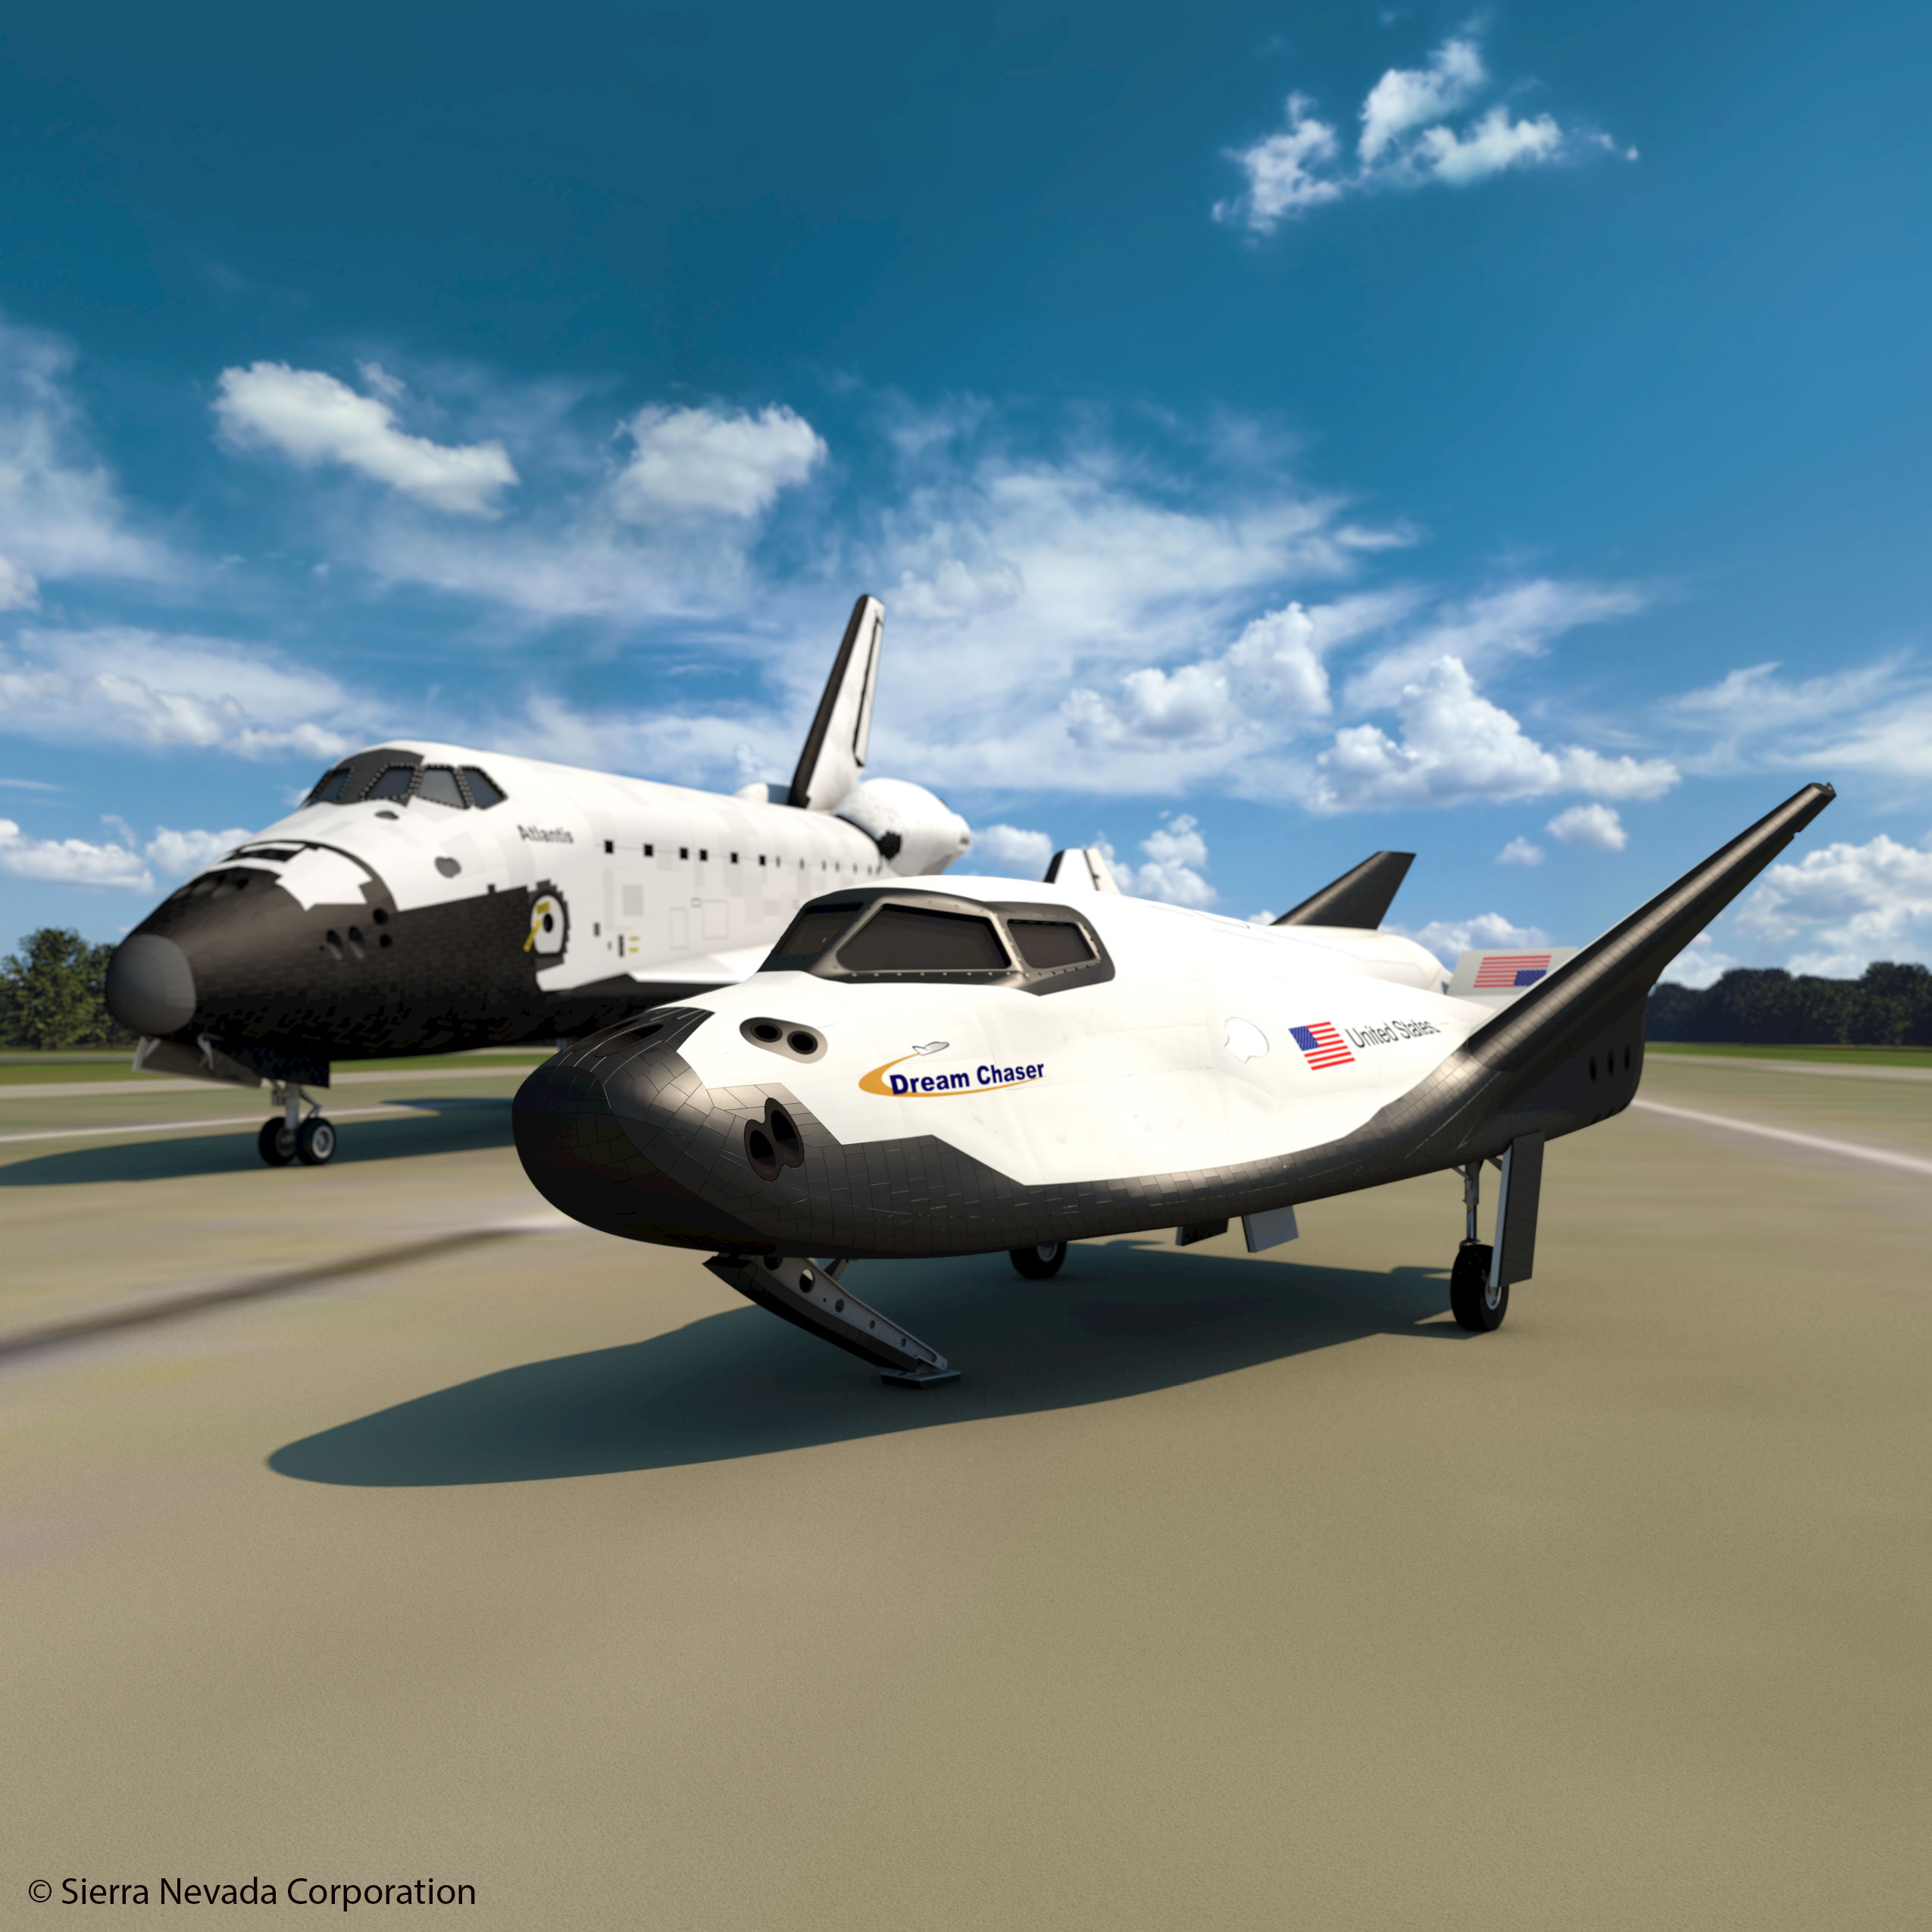 An artist’s rendering of Sierra Nevada’s Dream Chaser spacecraft alongside Space Shuttle Atlantis at the Shuttle Landing Facility in Florida. Credit: SNC